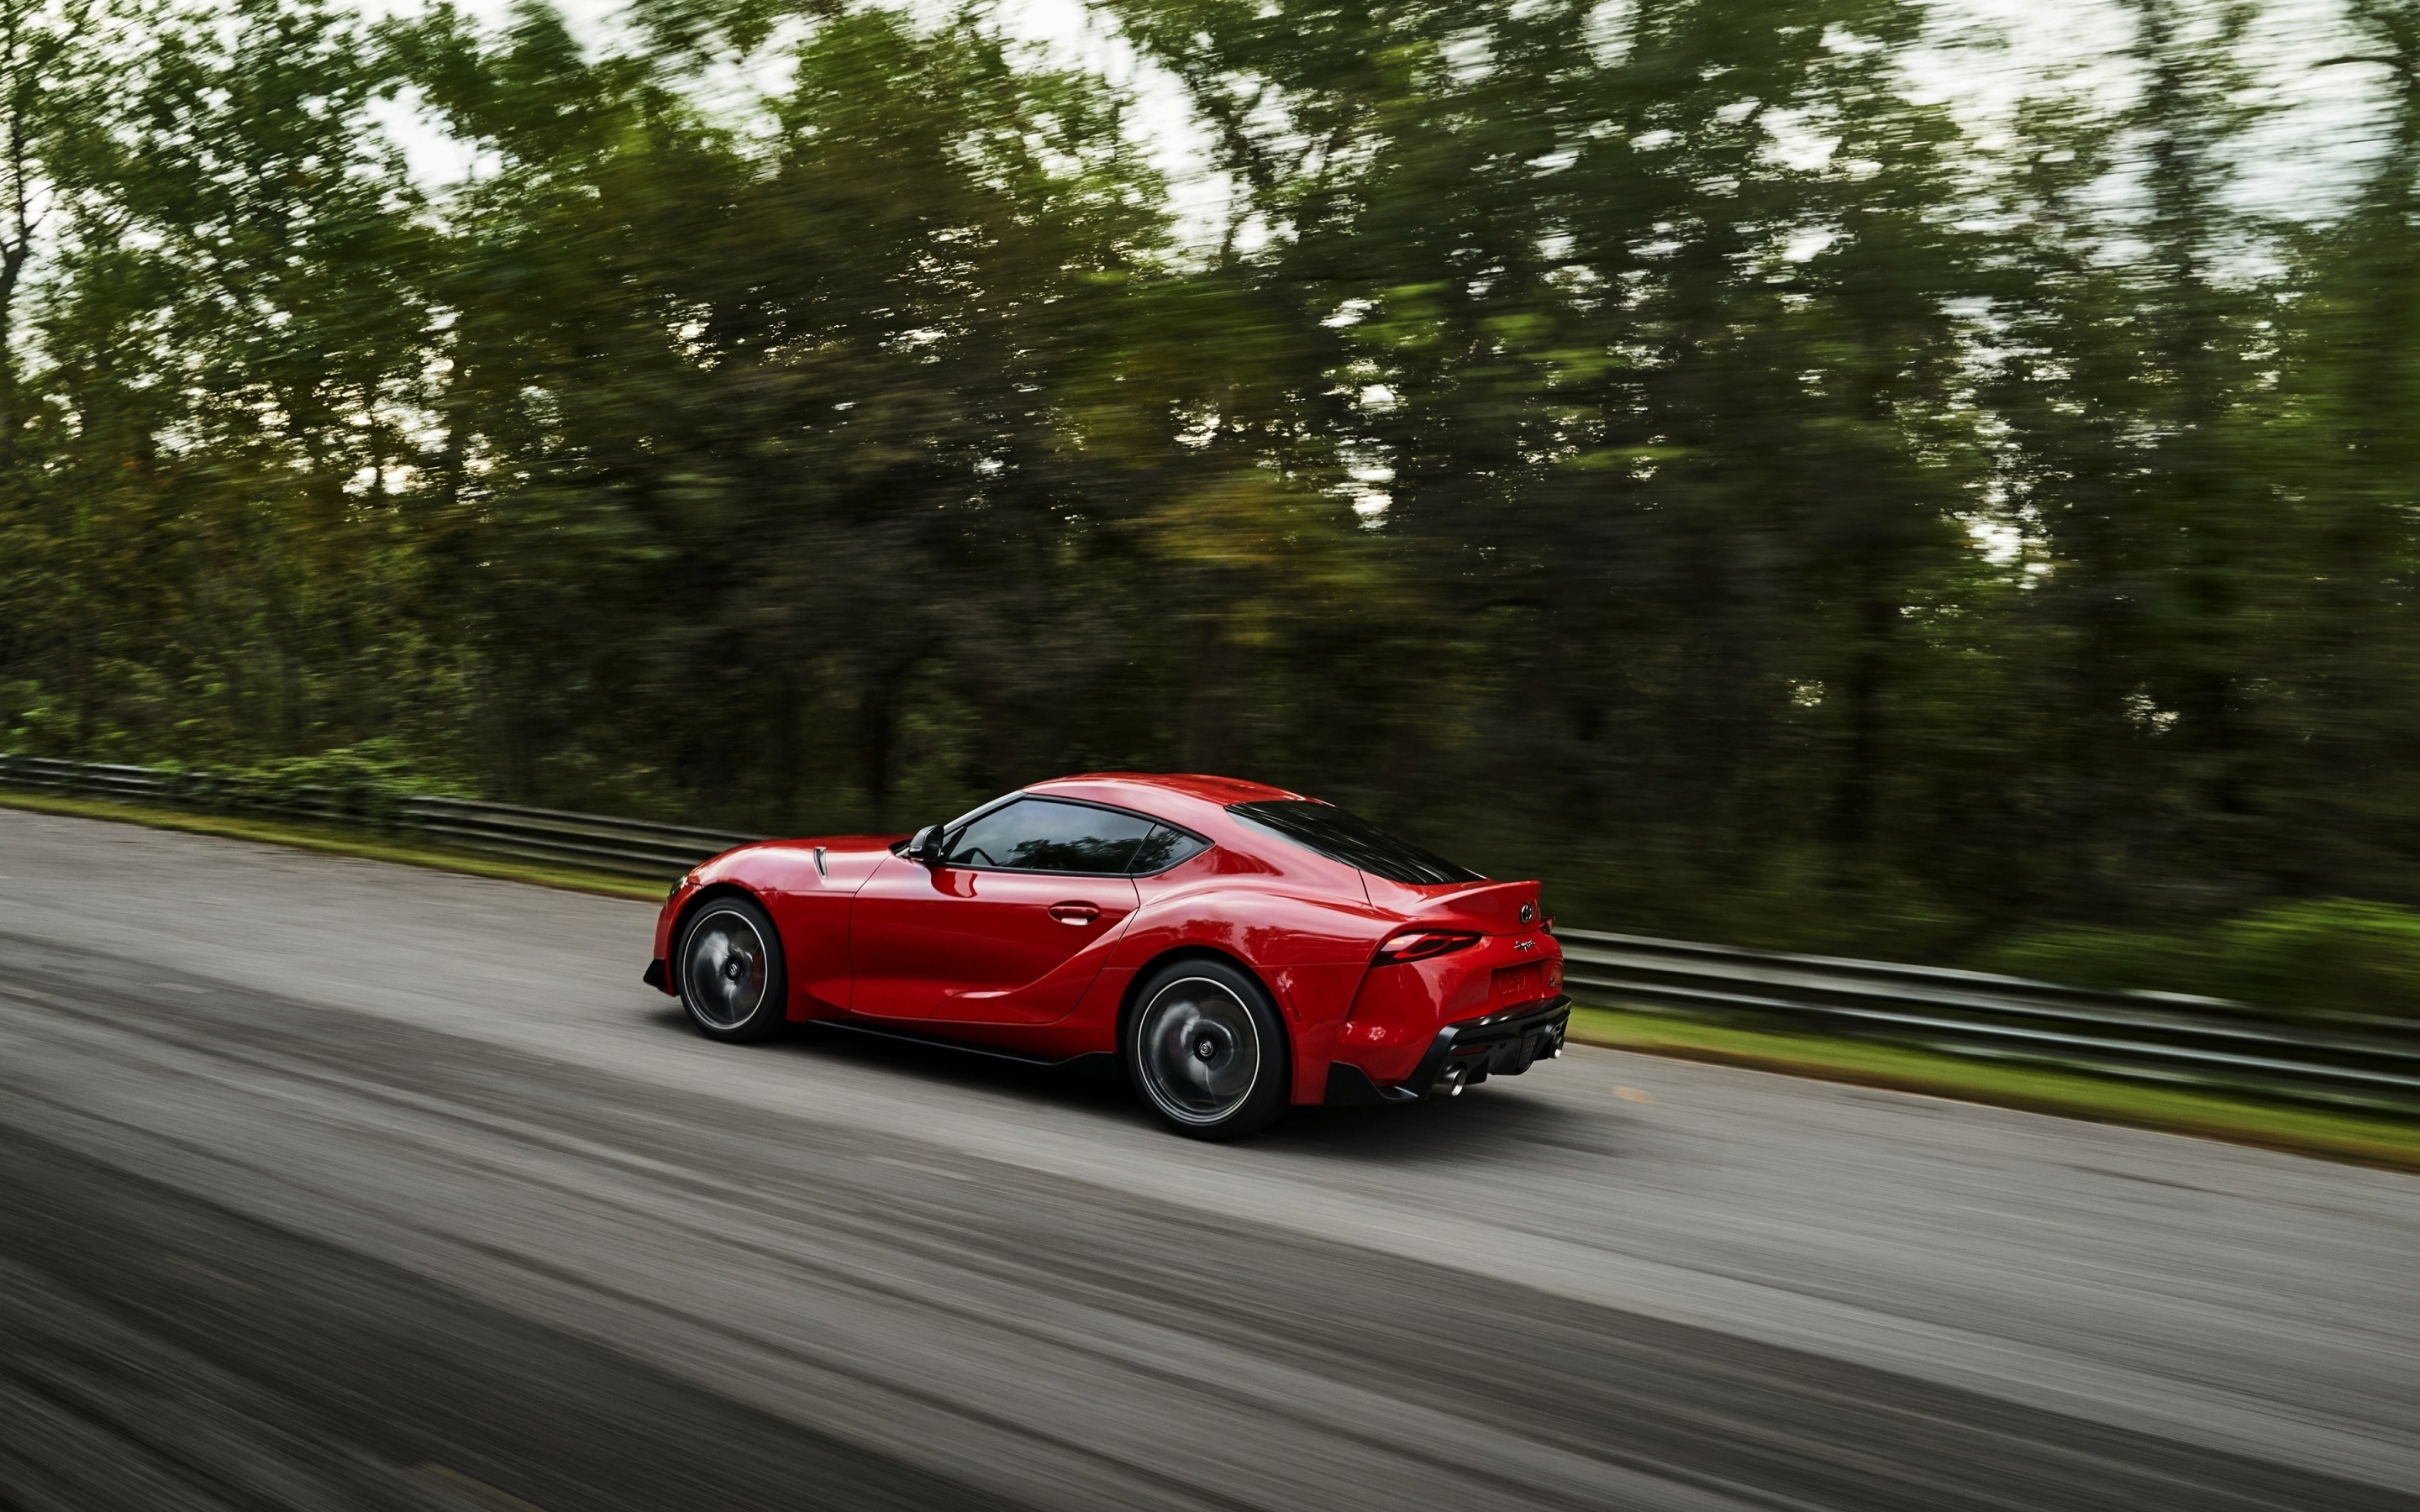 On-road, side view, sports car, Toyota Supra, 2880x1800 wallpaper